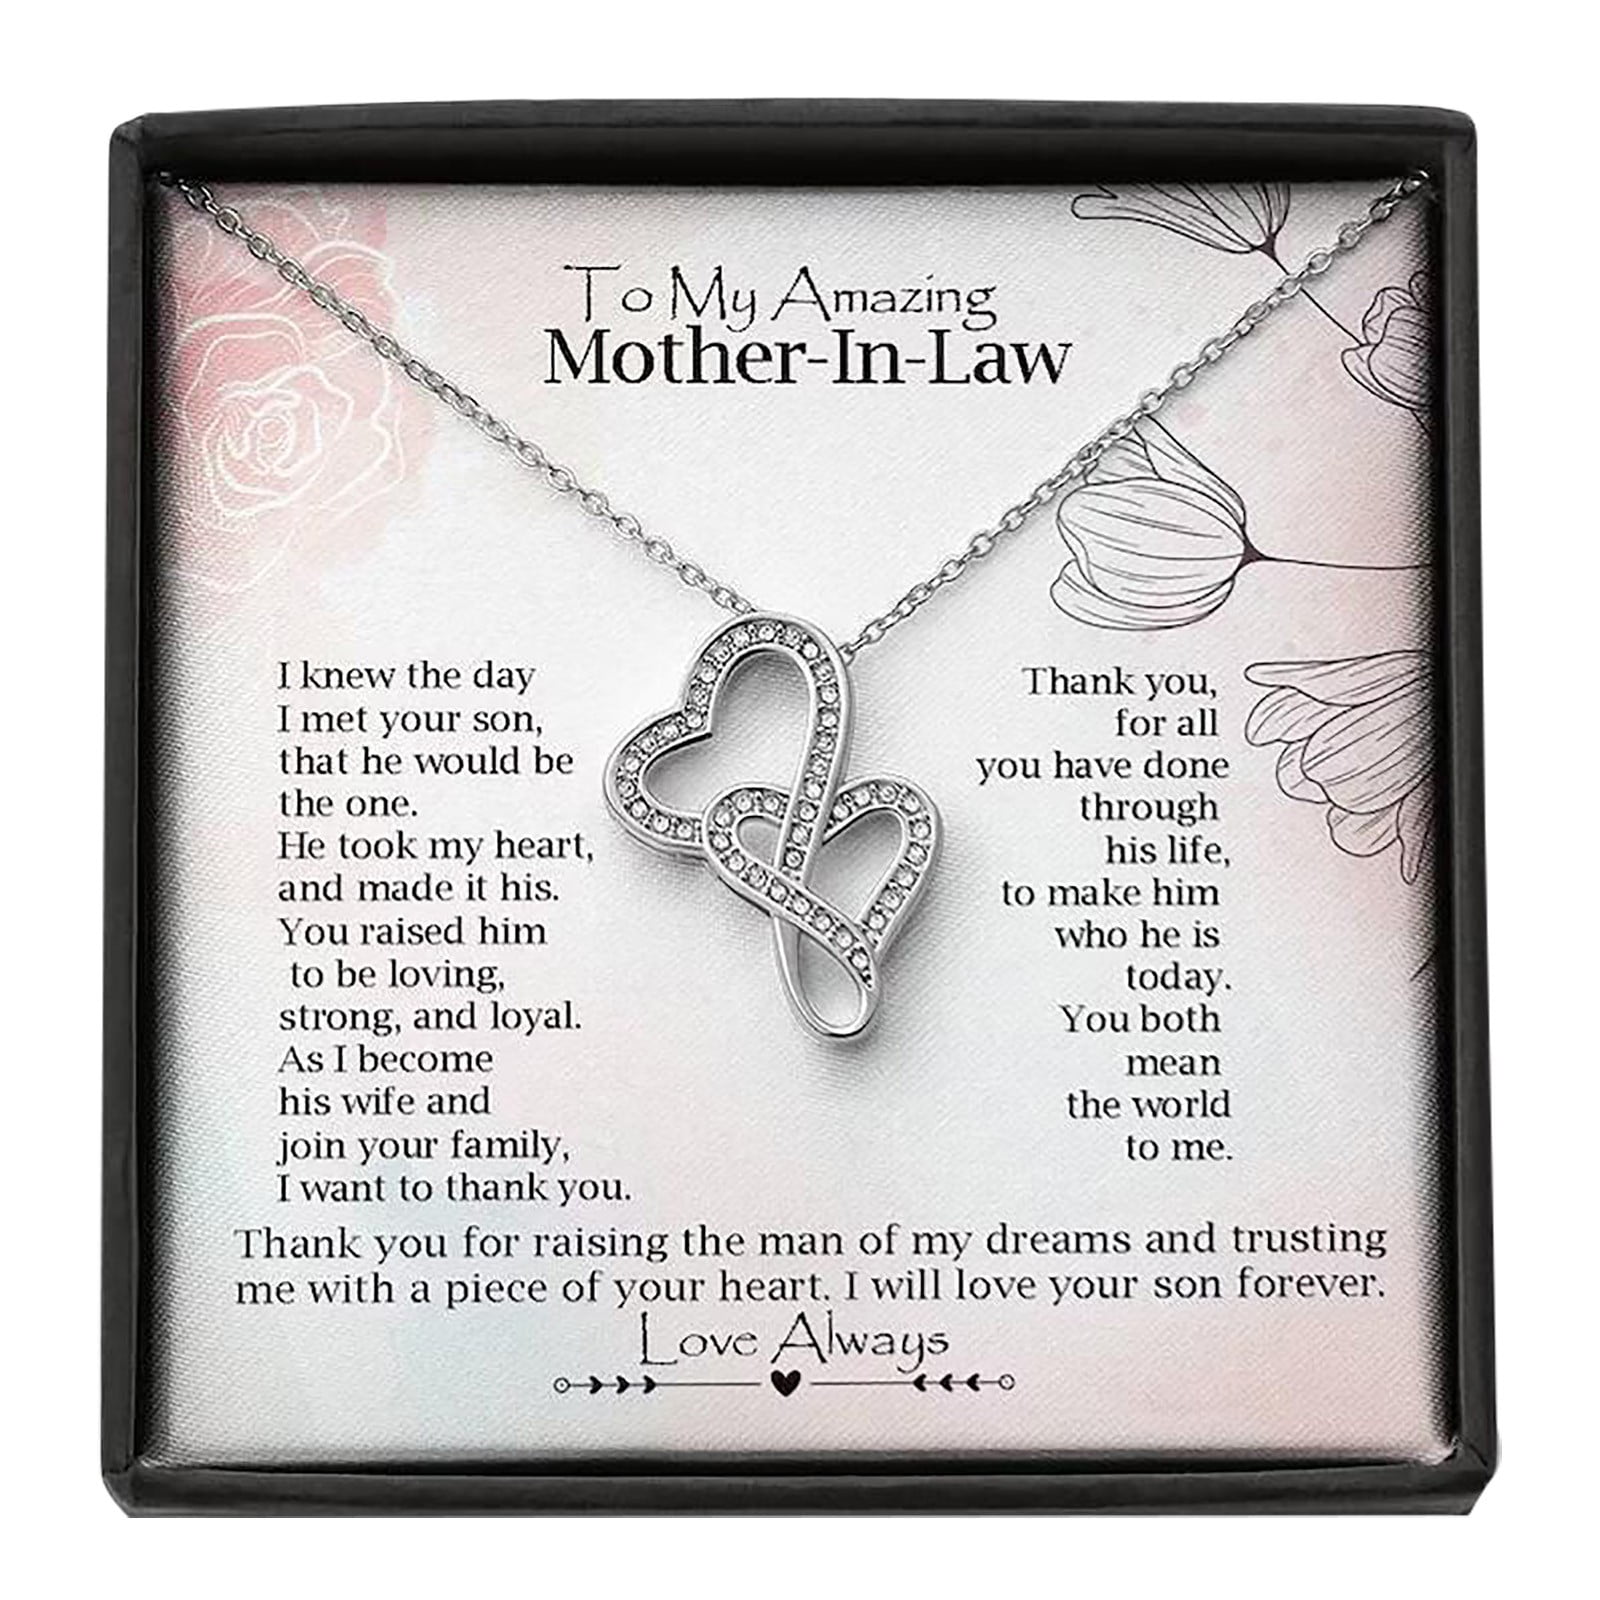 zttd double heart pendant necklace girlfriend meaningful necklaces women anniversary birthday valentines jewelry gifts wife girls 9c16268c 9e35 4b94 b5d4 c87662dbeb20.ed5d336079e9355ee2ba1802d287dccd